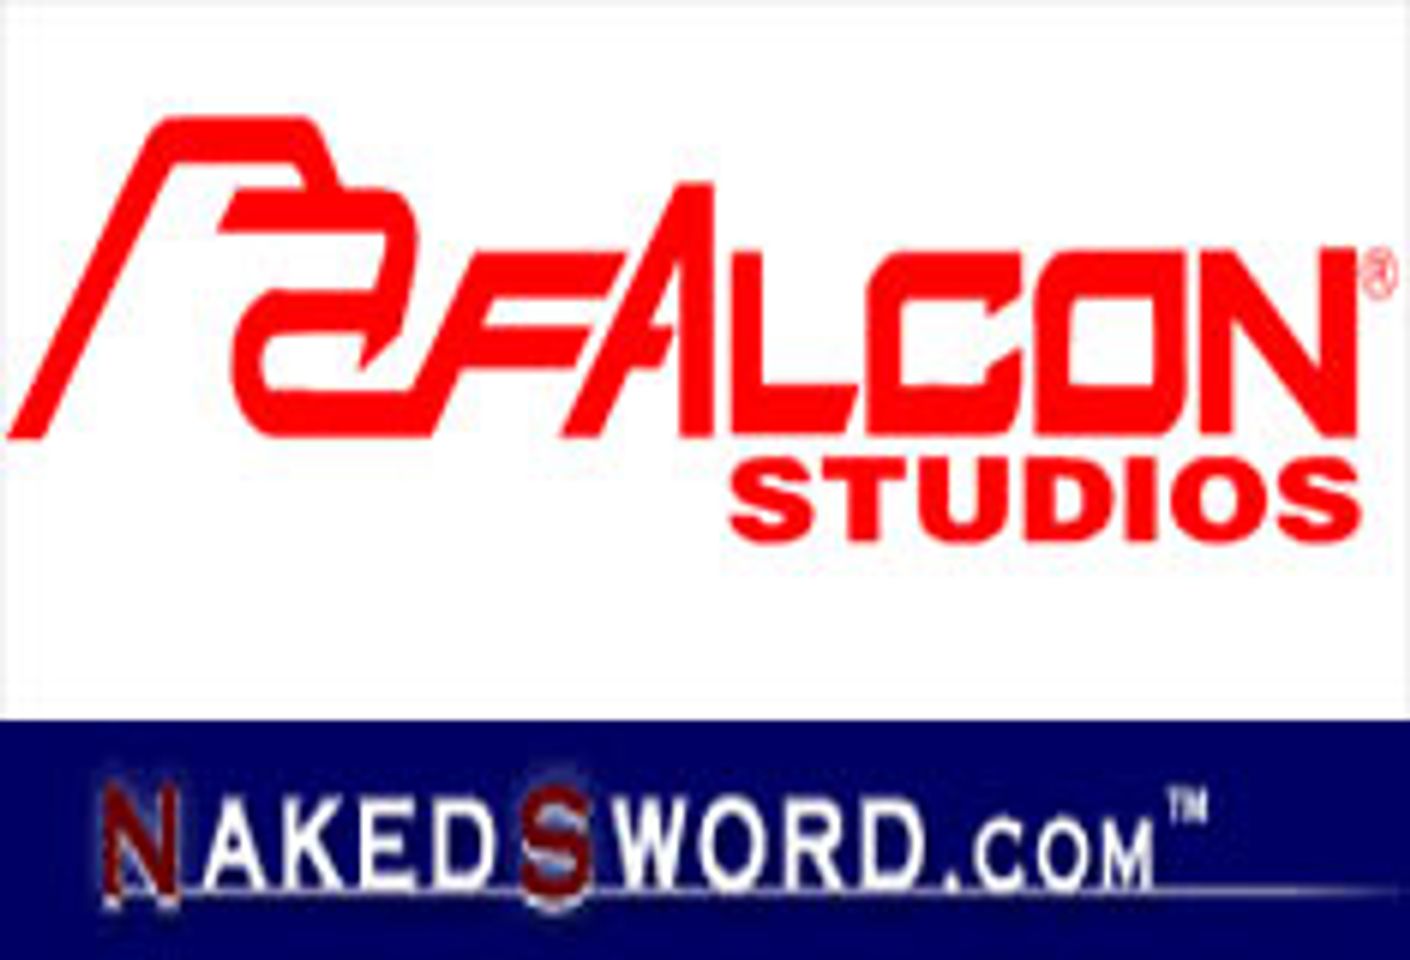 NakedSword.com To Stream Falcon Video Exclusively